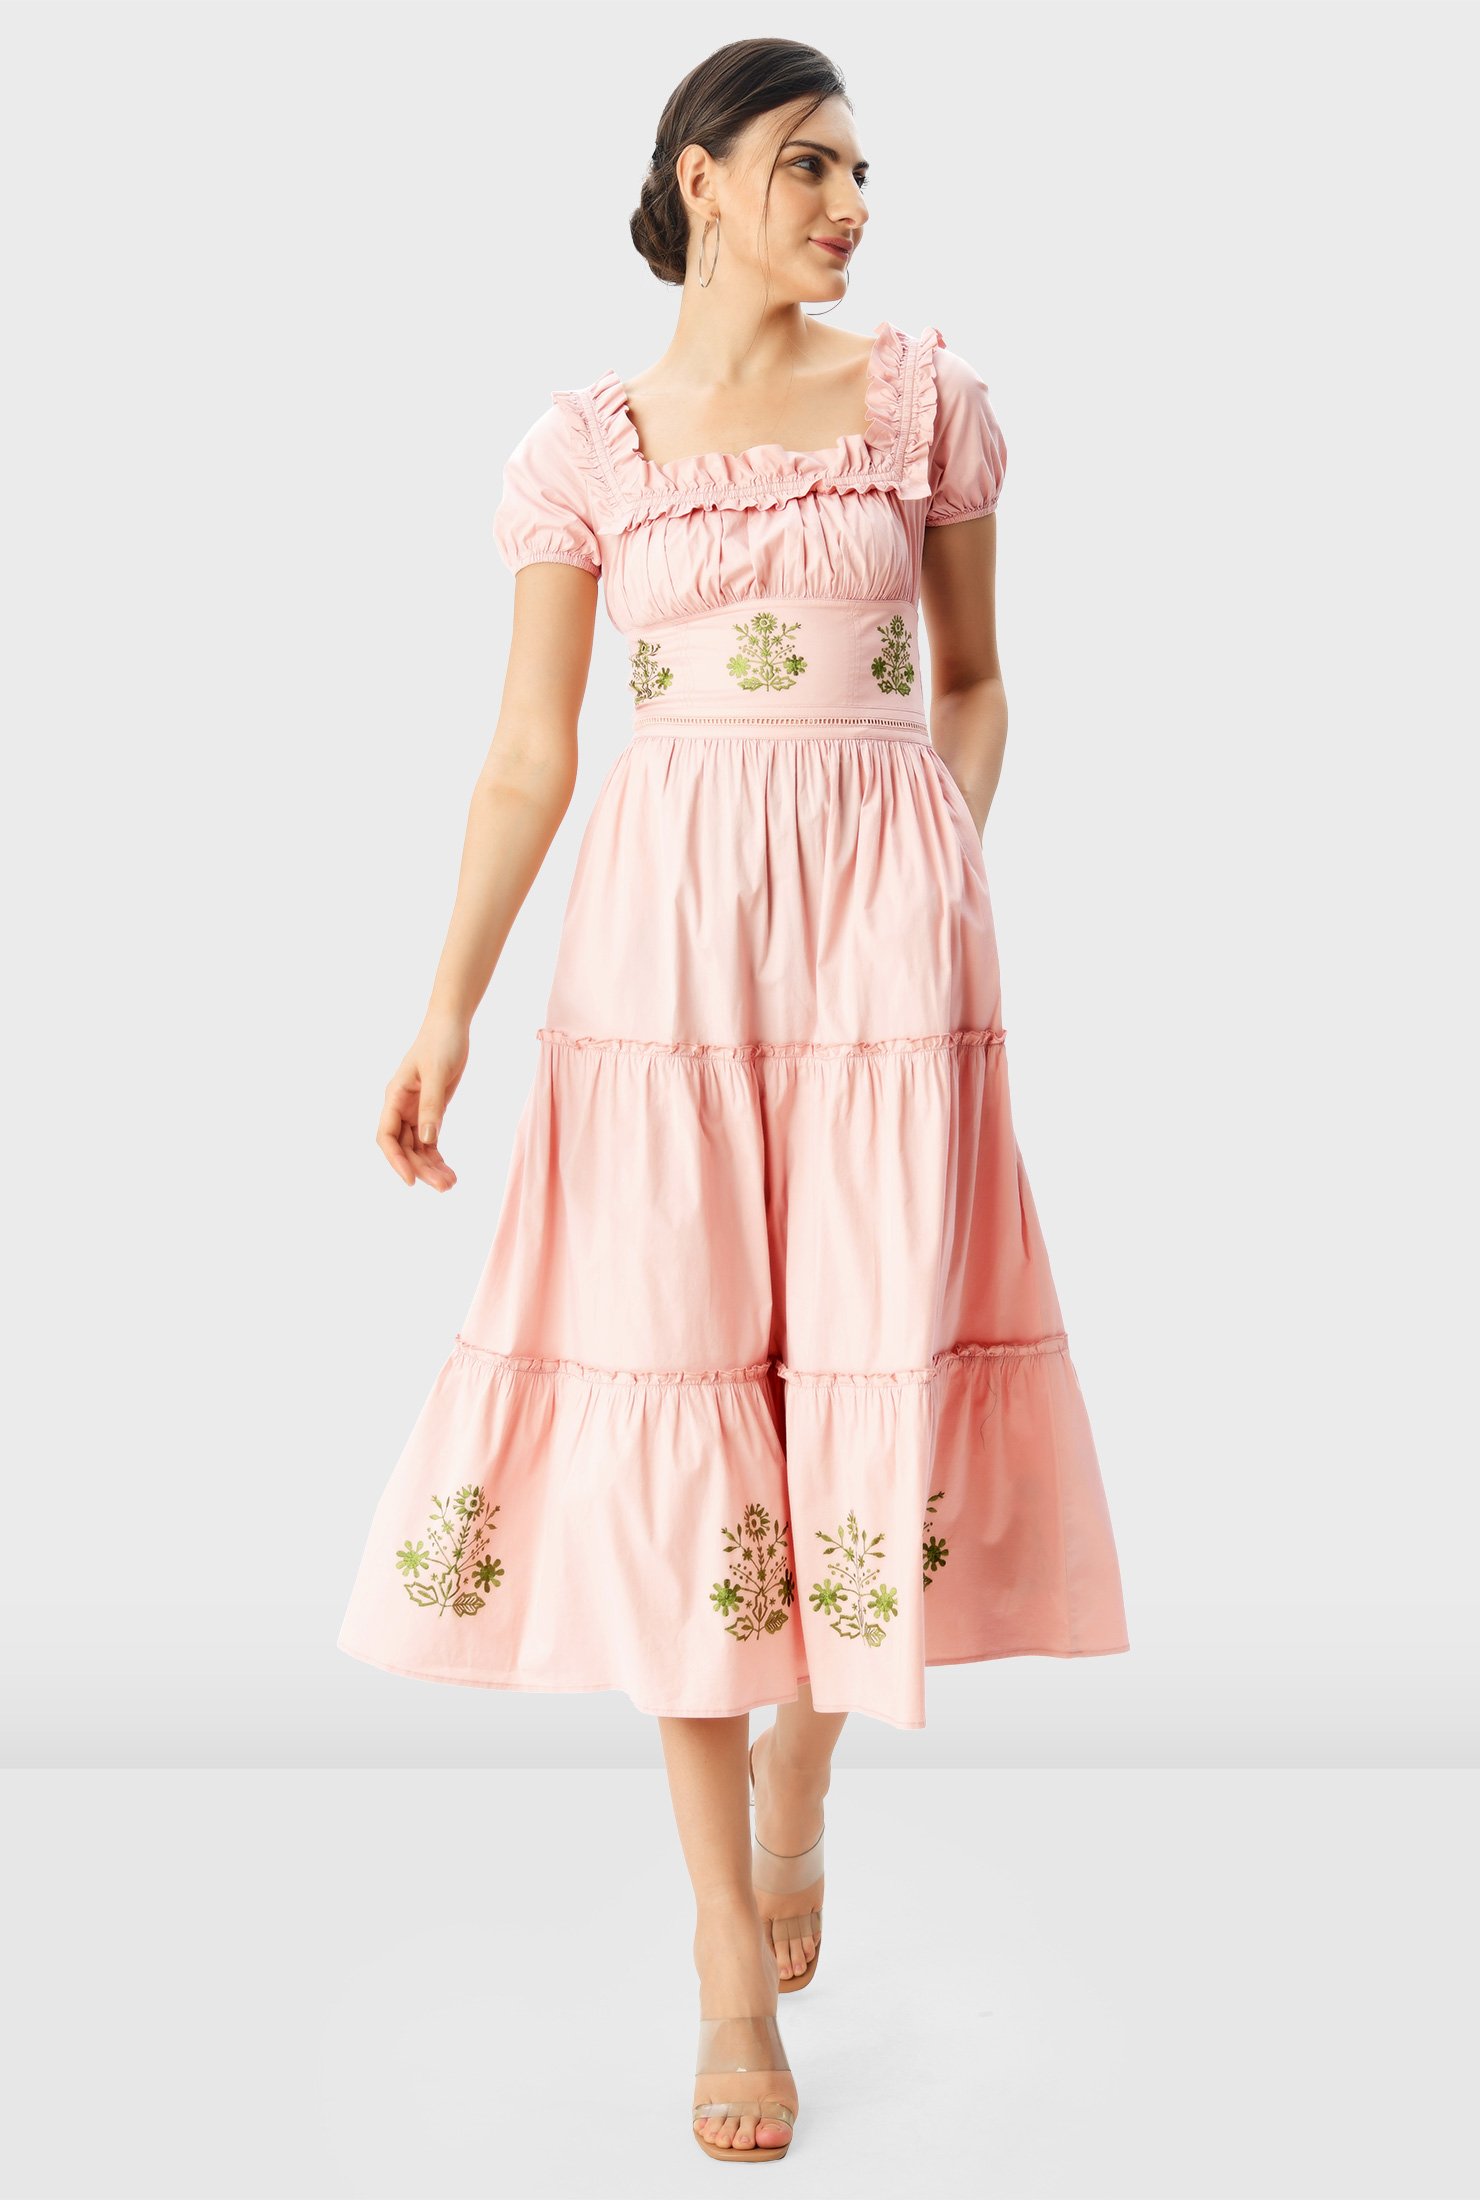 Shop Floral embroidery cotton poplin ruched tier dress